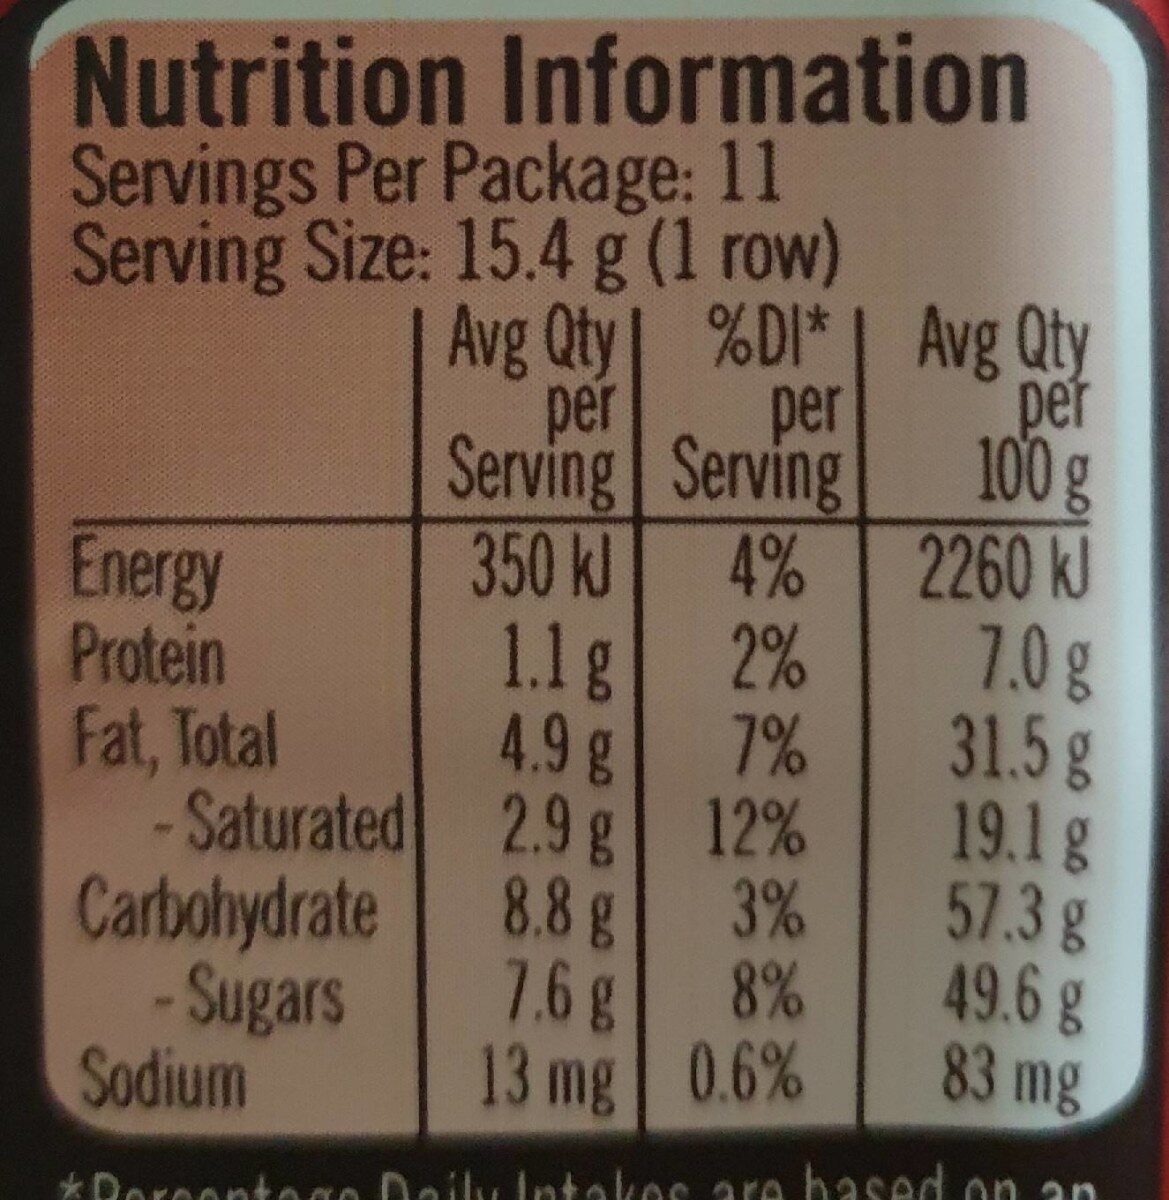 Kitkat gold - Nutrition facts